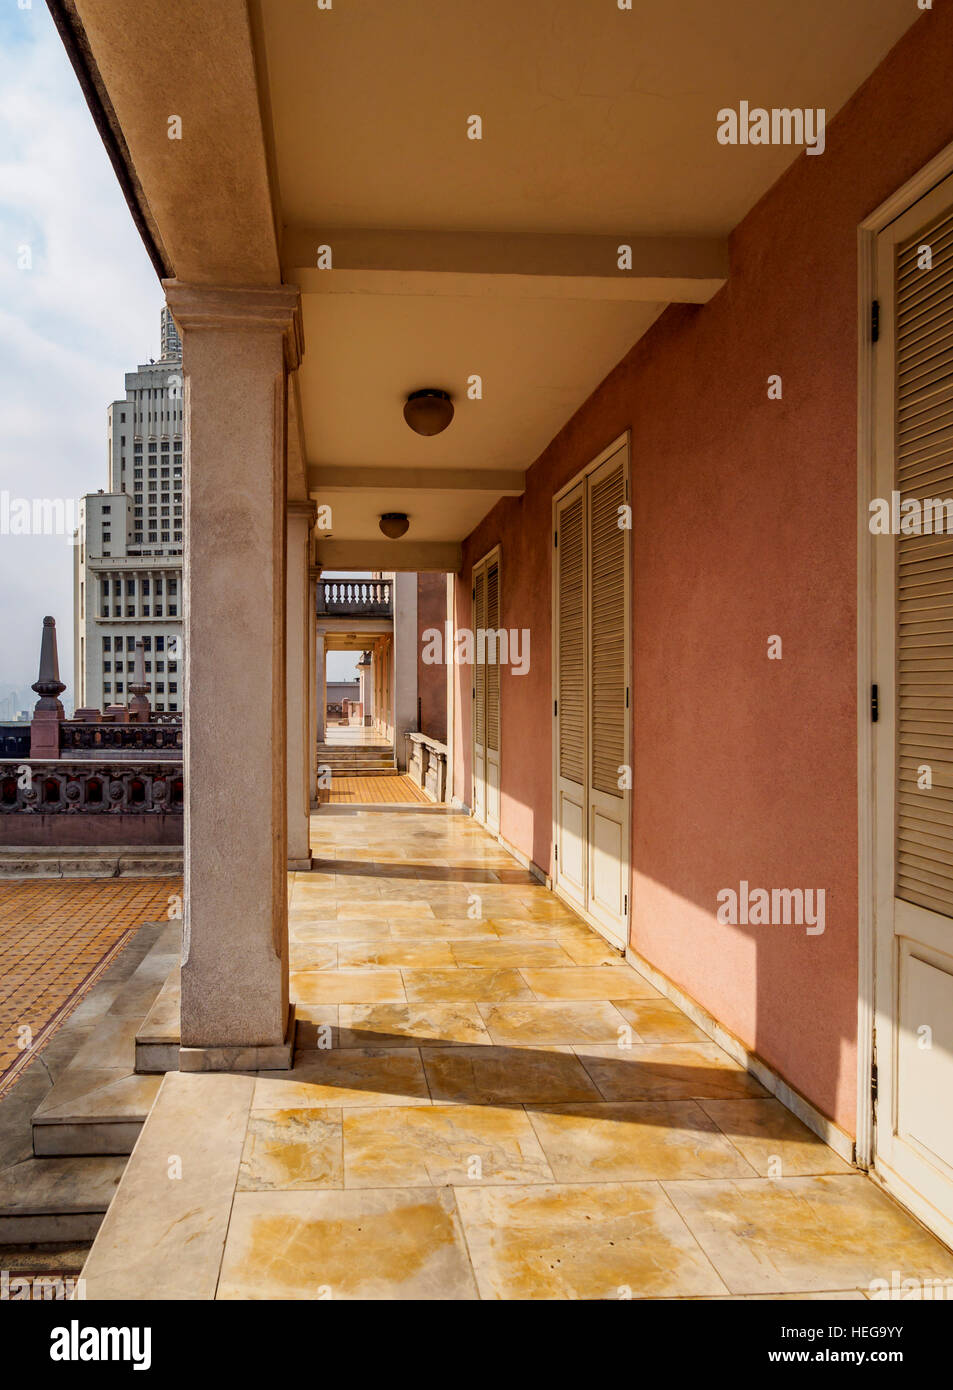 Brazil, State of Sao Paulo, City of Sao Paulo, View of the Martinelli Building. Stock Photo